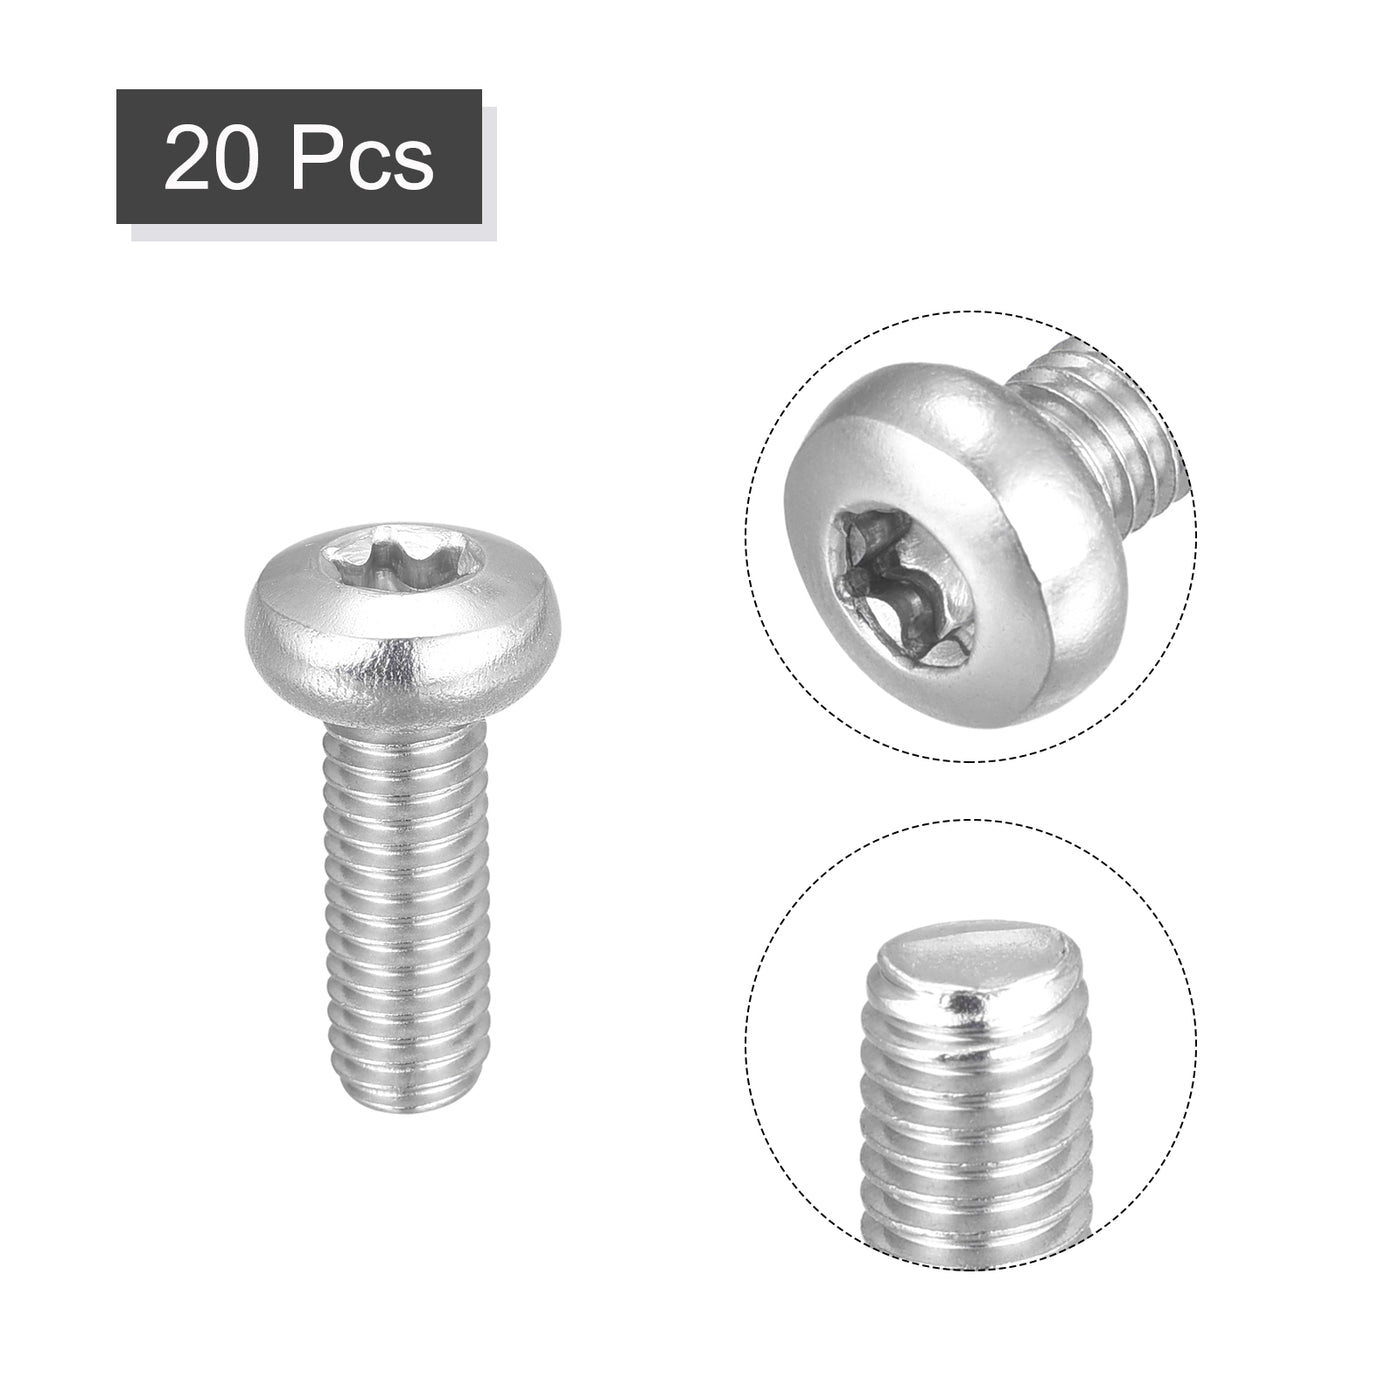 uxcell Uxcell M5x16mm Torx Security Machine Screws, 20pcs 316 Stainless Steel Pan Head Screw